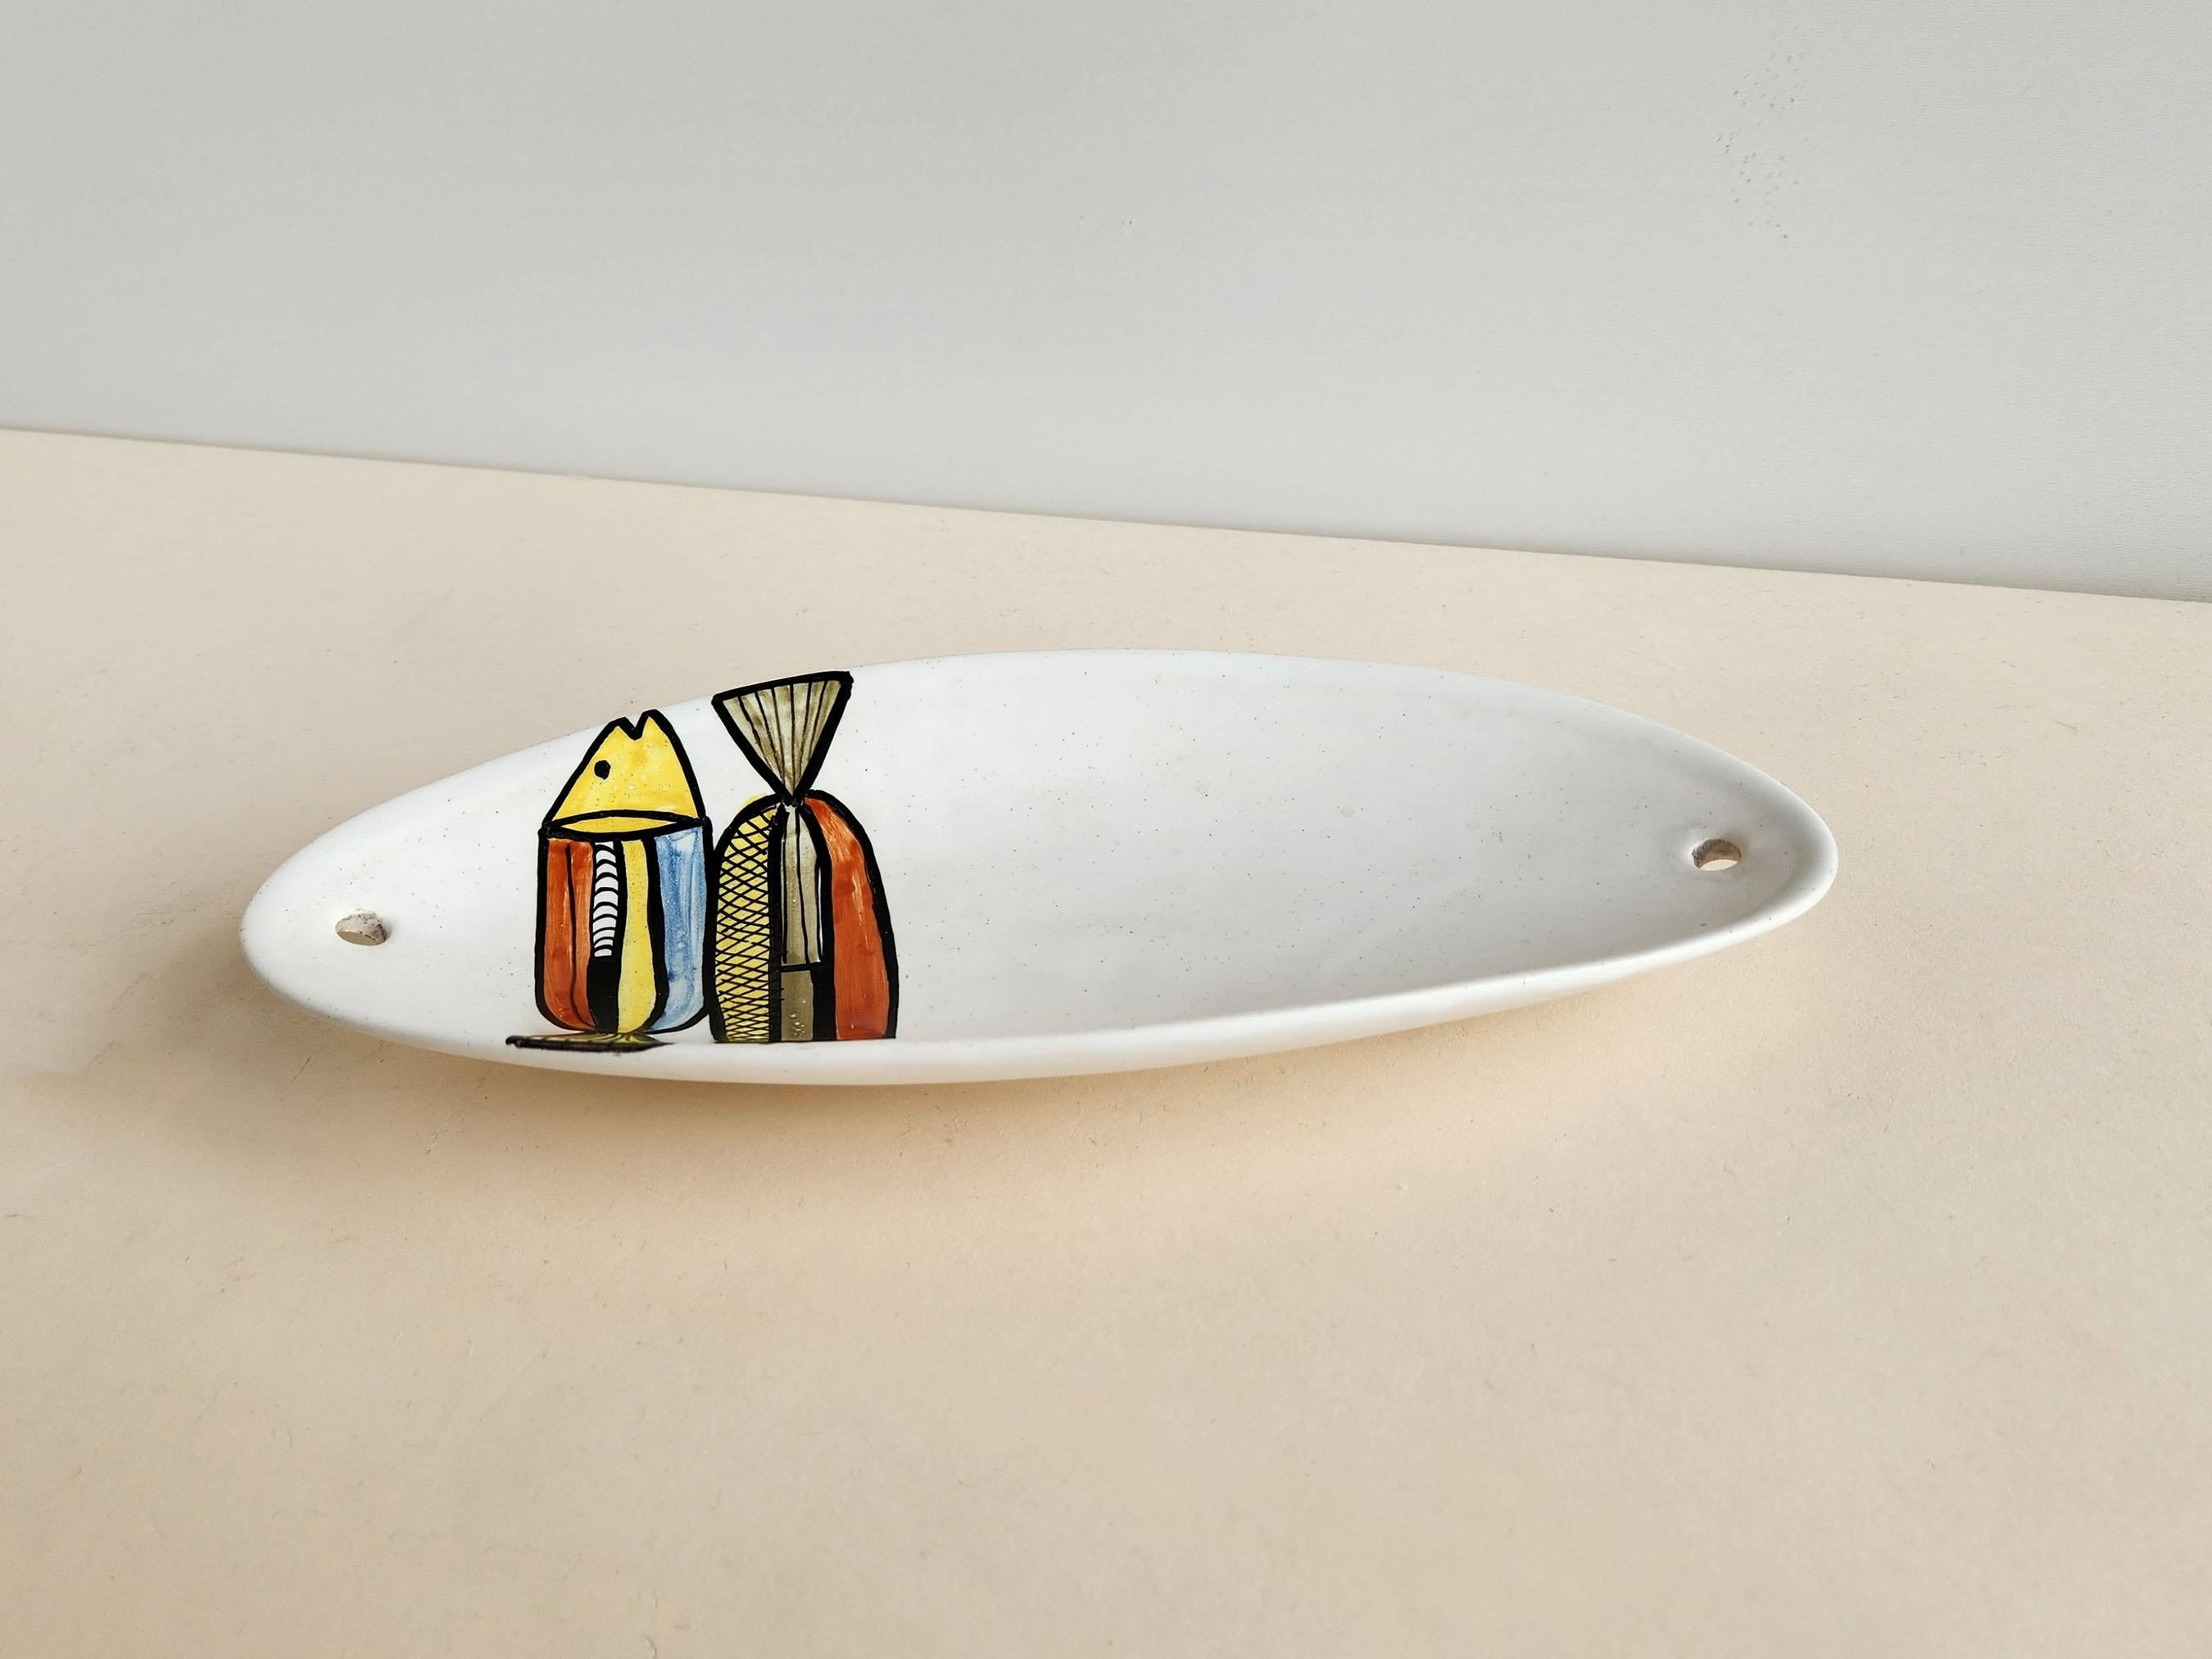 Vintage Ceramic Mini Canoe Serving Platter with Fish Motif by Roger Capron - Vallauris, France

Roger Capron was in influential French ceramicist, known for his tiled tables and his use of recurring motifs such as stylized branches and geometrical